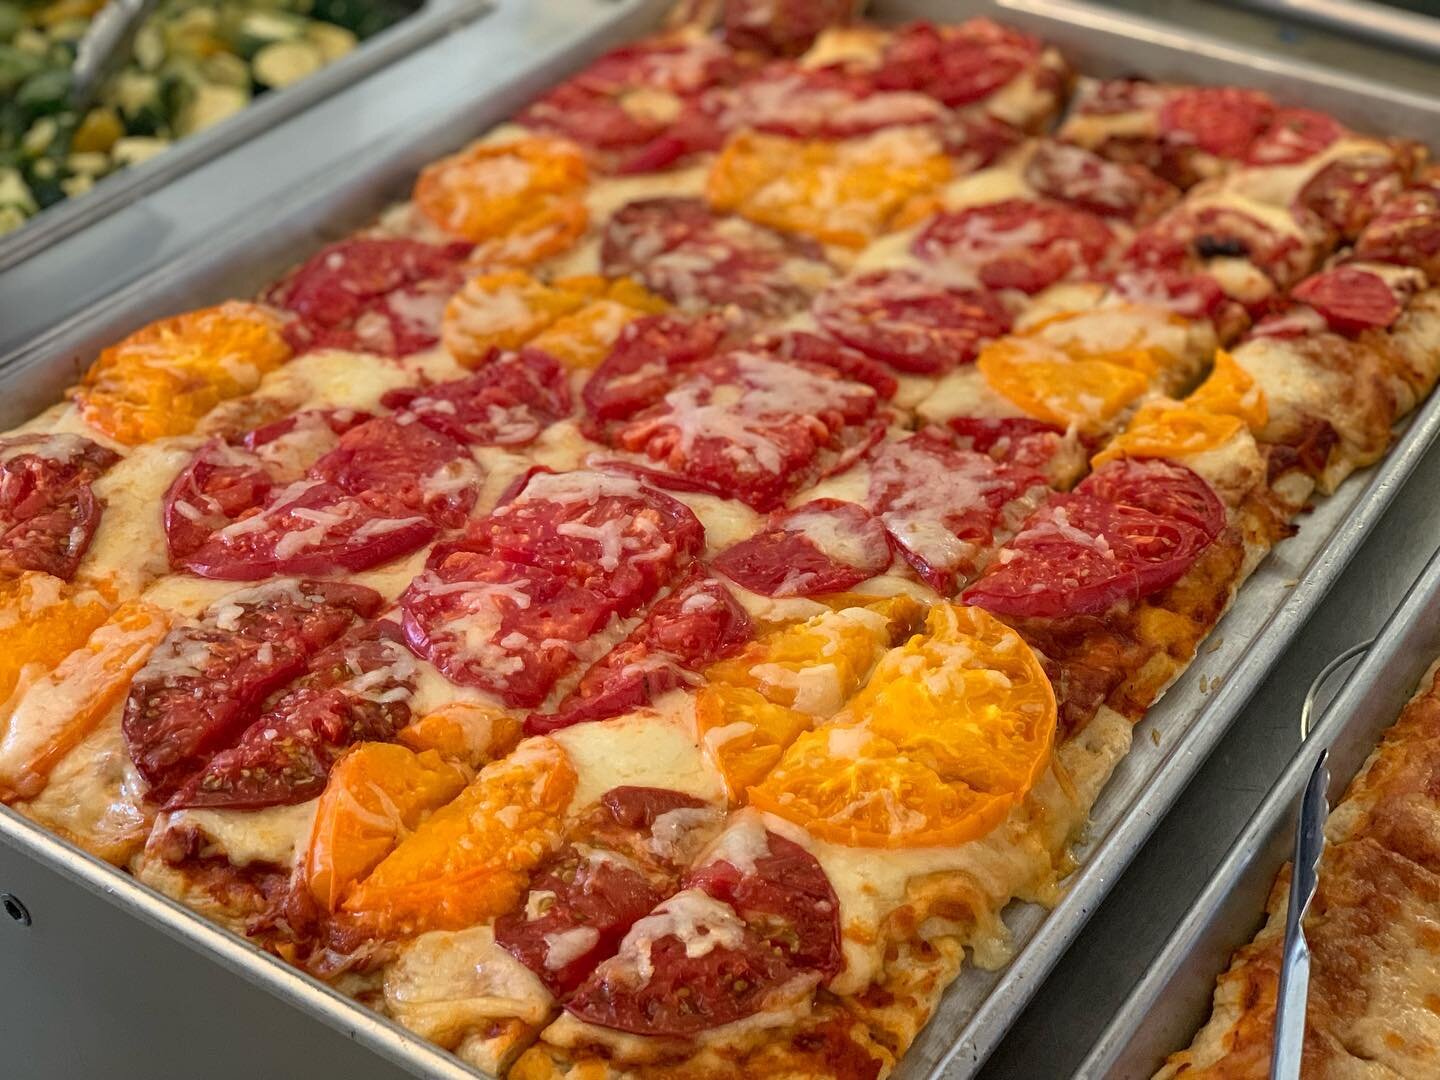 When summer heirloom tomatoes look this good, we put them on everything! 🍅🍕